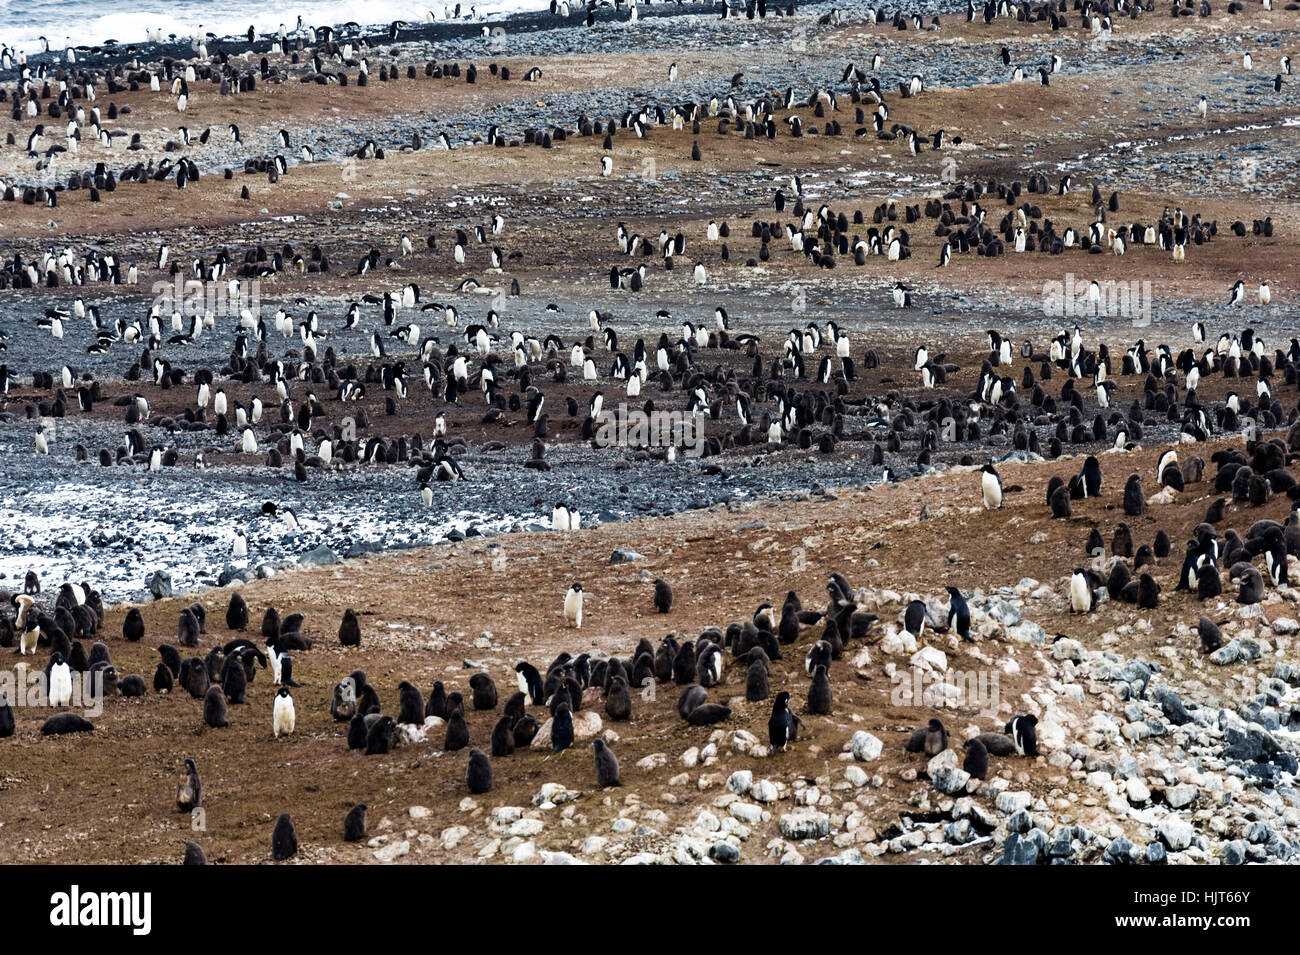 A breeding colony of Adelie Penguins on an island in Antarctica. Stock Photo